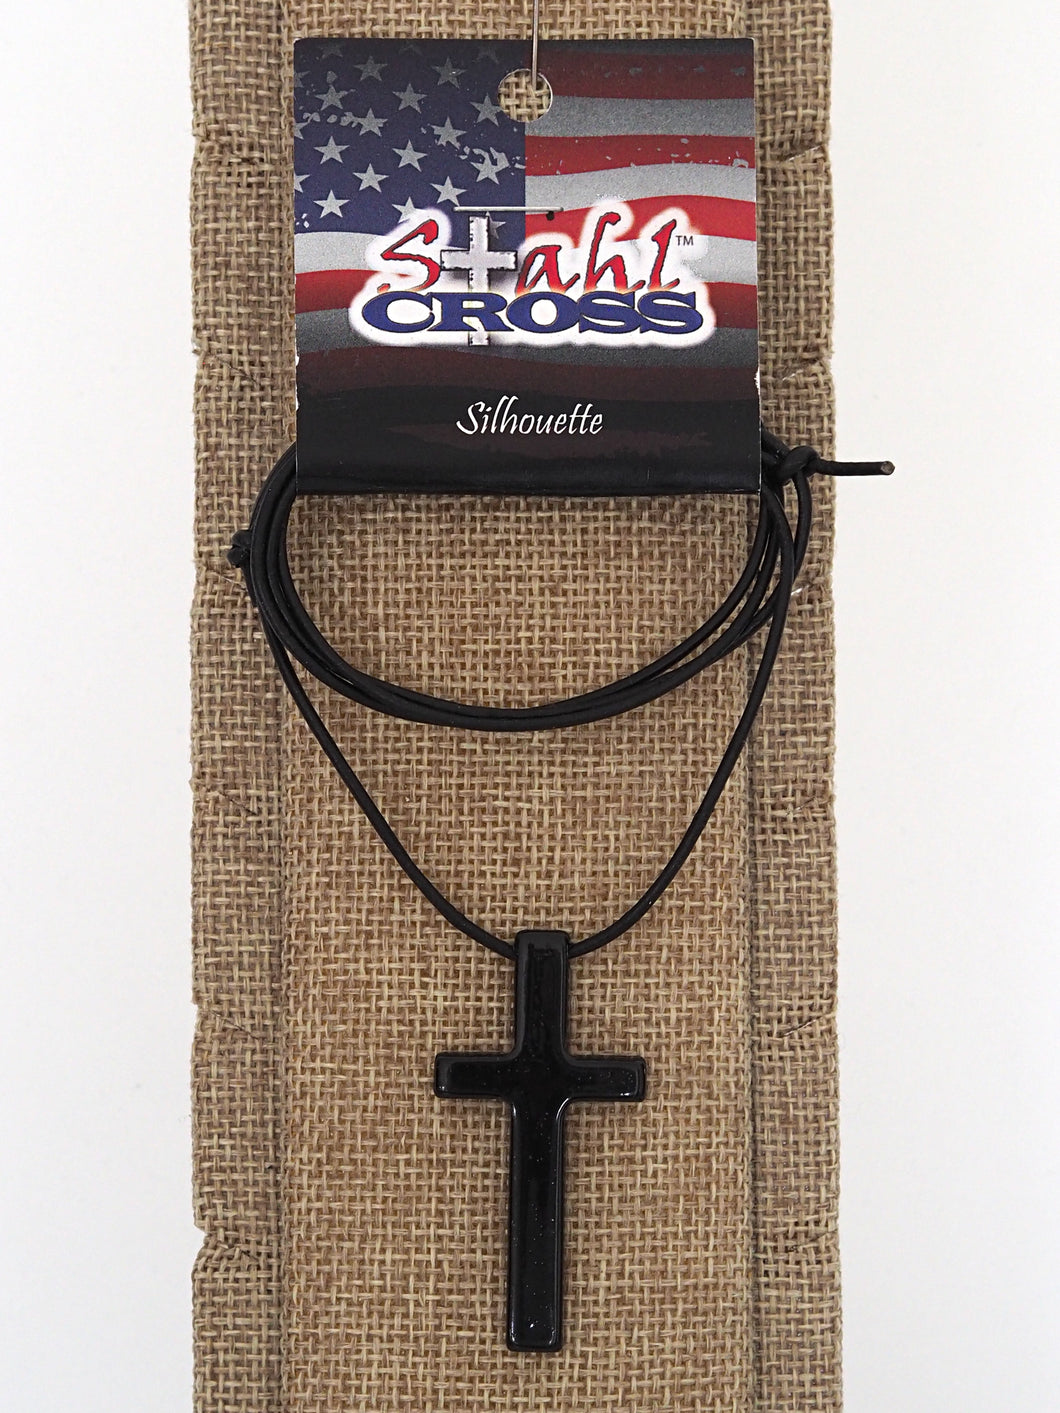 Silhouette Cross Necklace